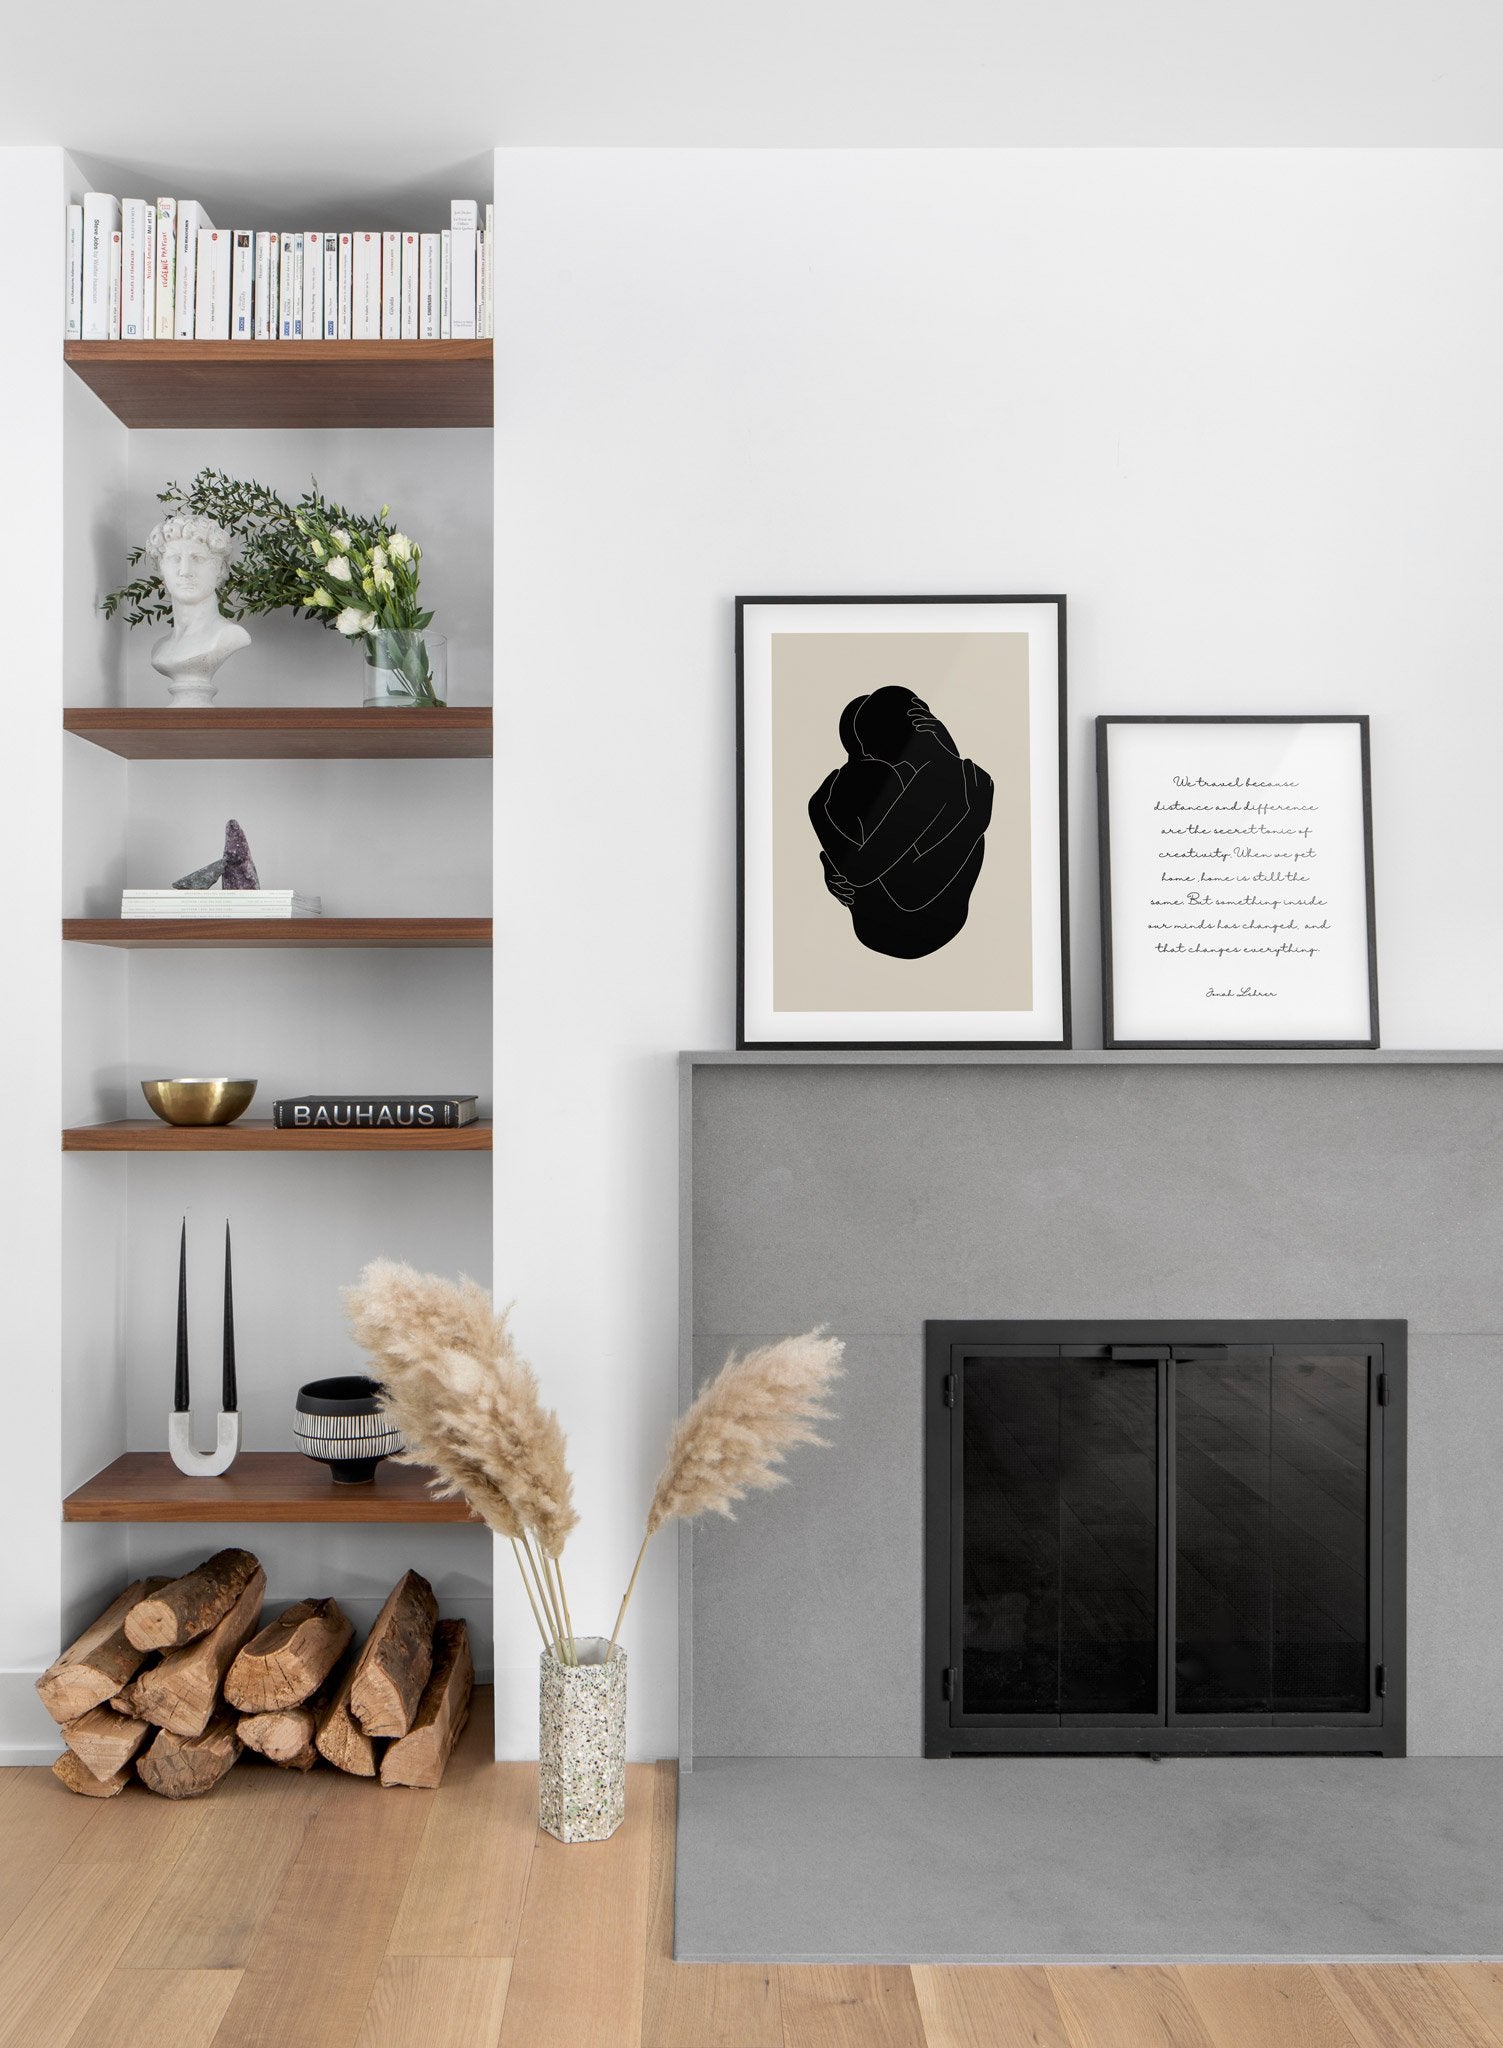 Minimalist design poster by Opposite Wall with abstract embracing couple - Living room with a fireplace - duo